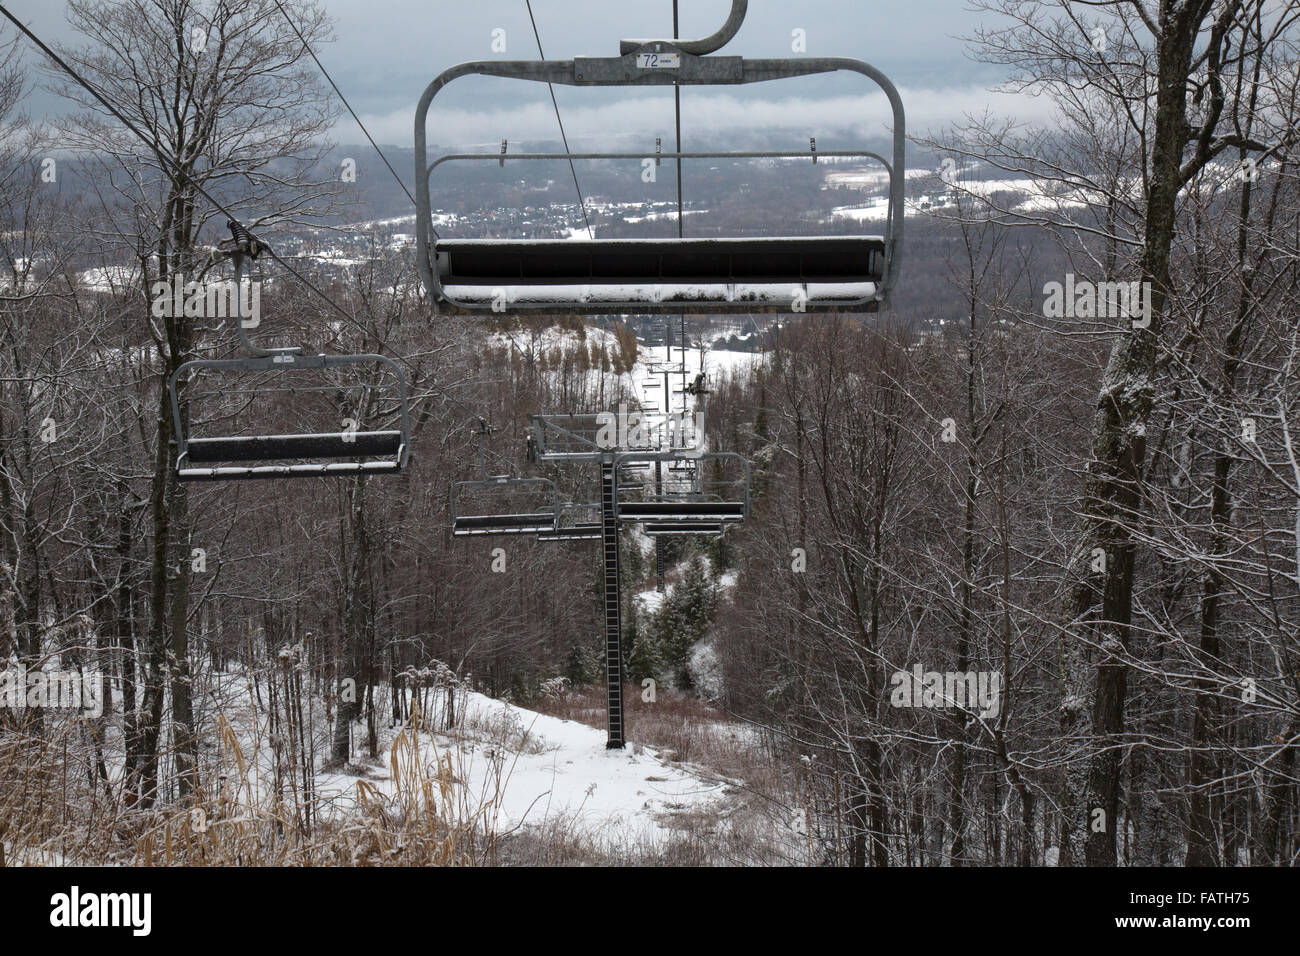 Empty chairs on the chair lift at the ski resorts at Collingwood, Ontario, Canada Stock Photo